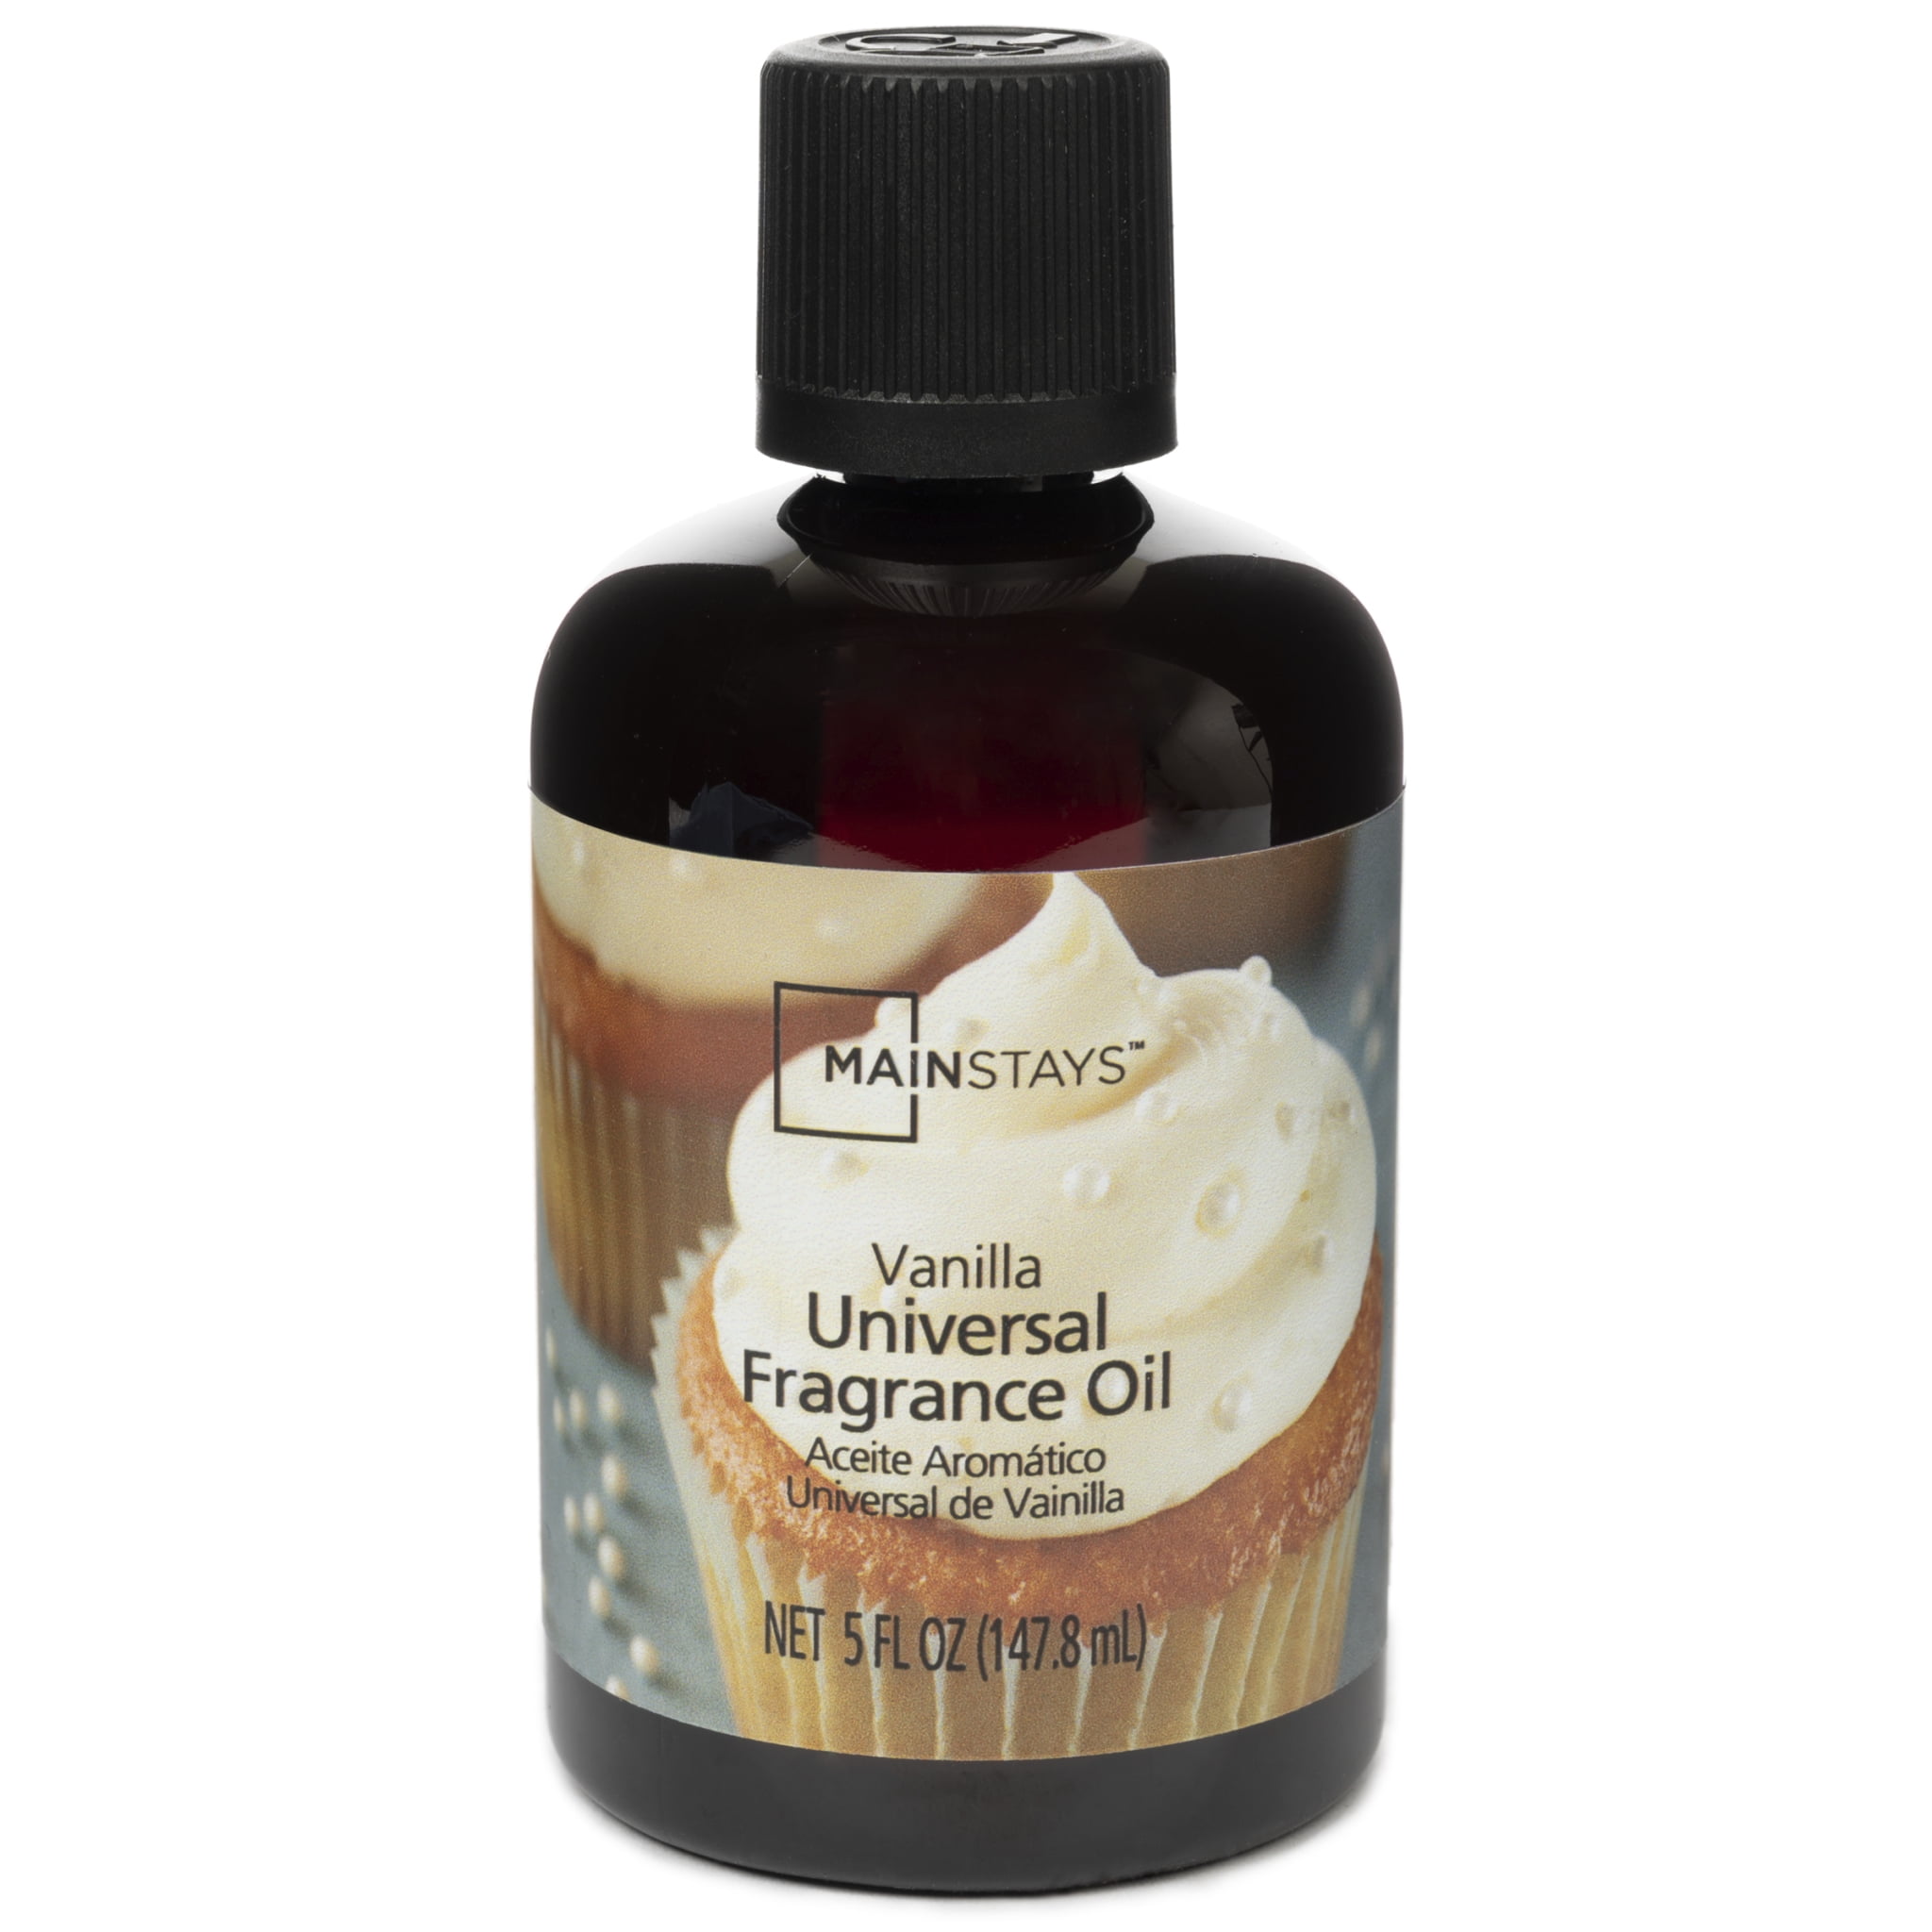 Mainstays Universal Scented Fragrance Oil, Vanilla, 5 fl oz, for use with Fragrance Oil Diffusers, Fragrance Warmers, Potpourri, and Wicking Fragrance Diffusers